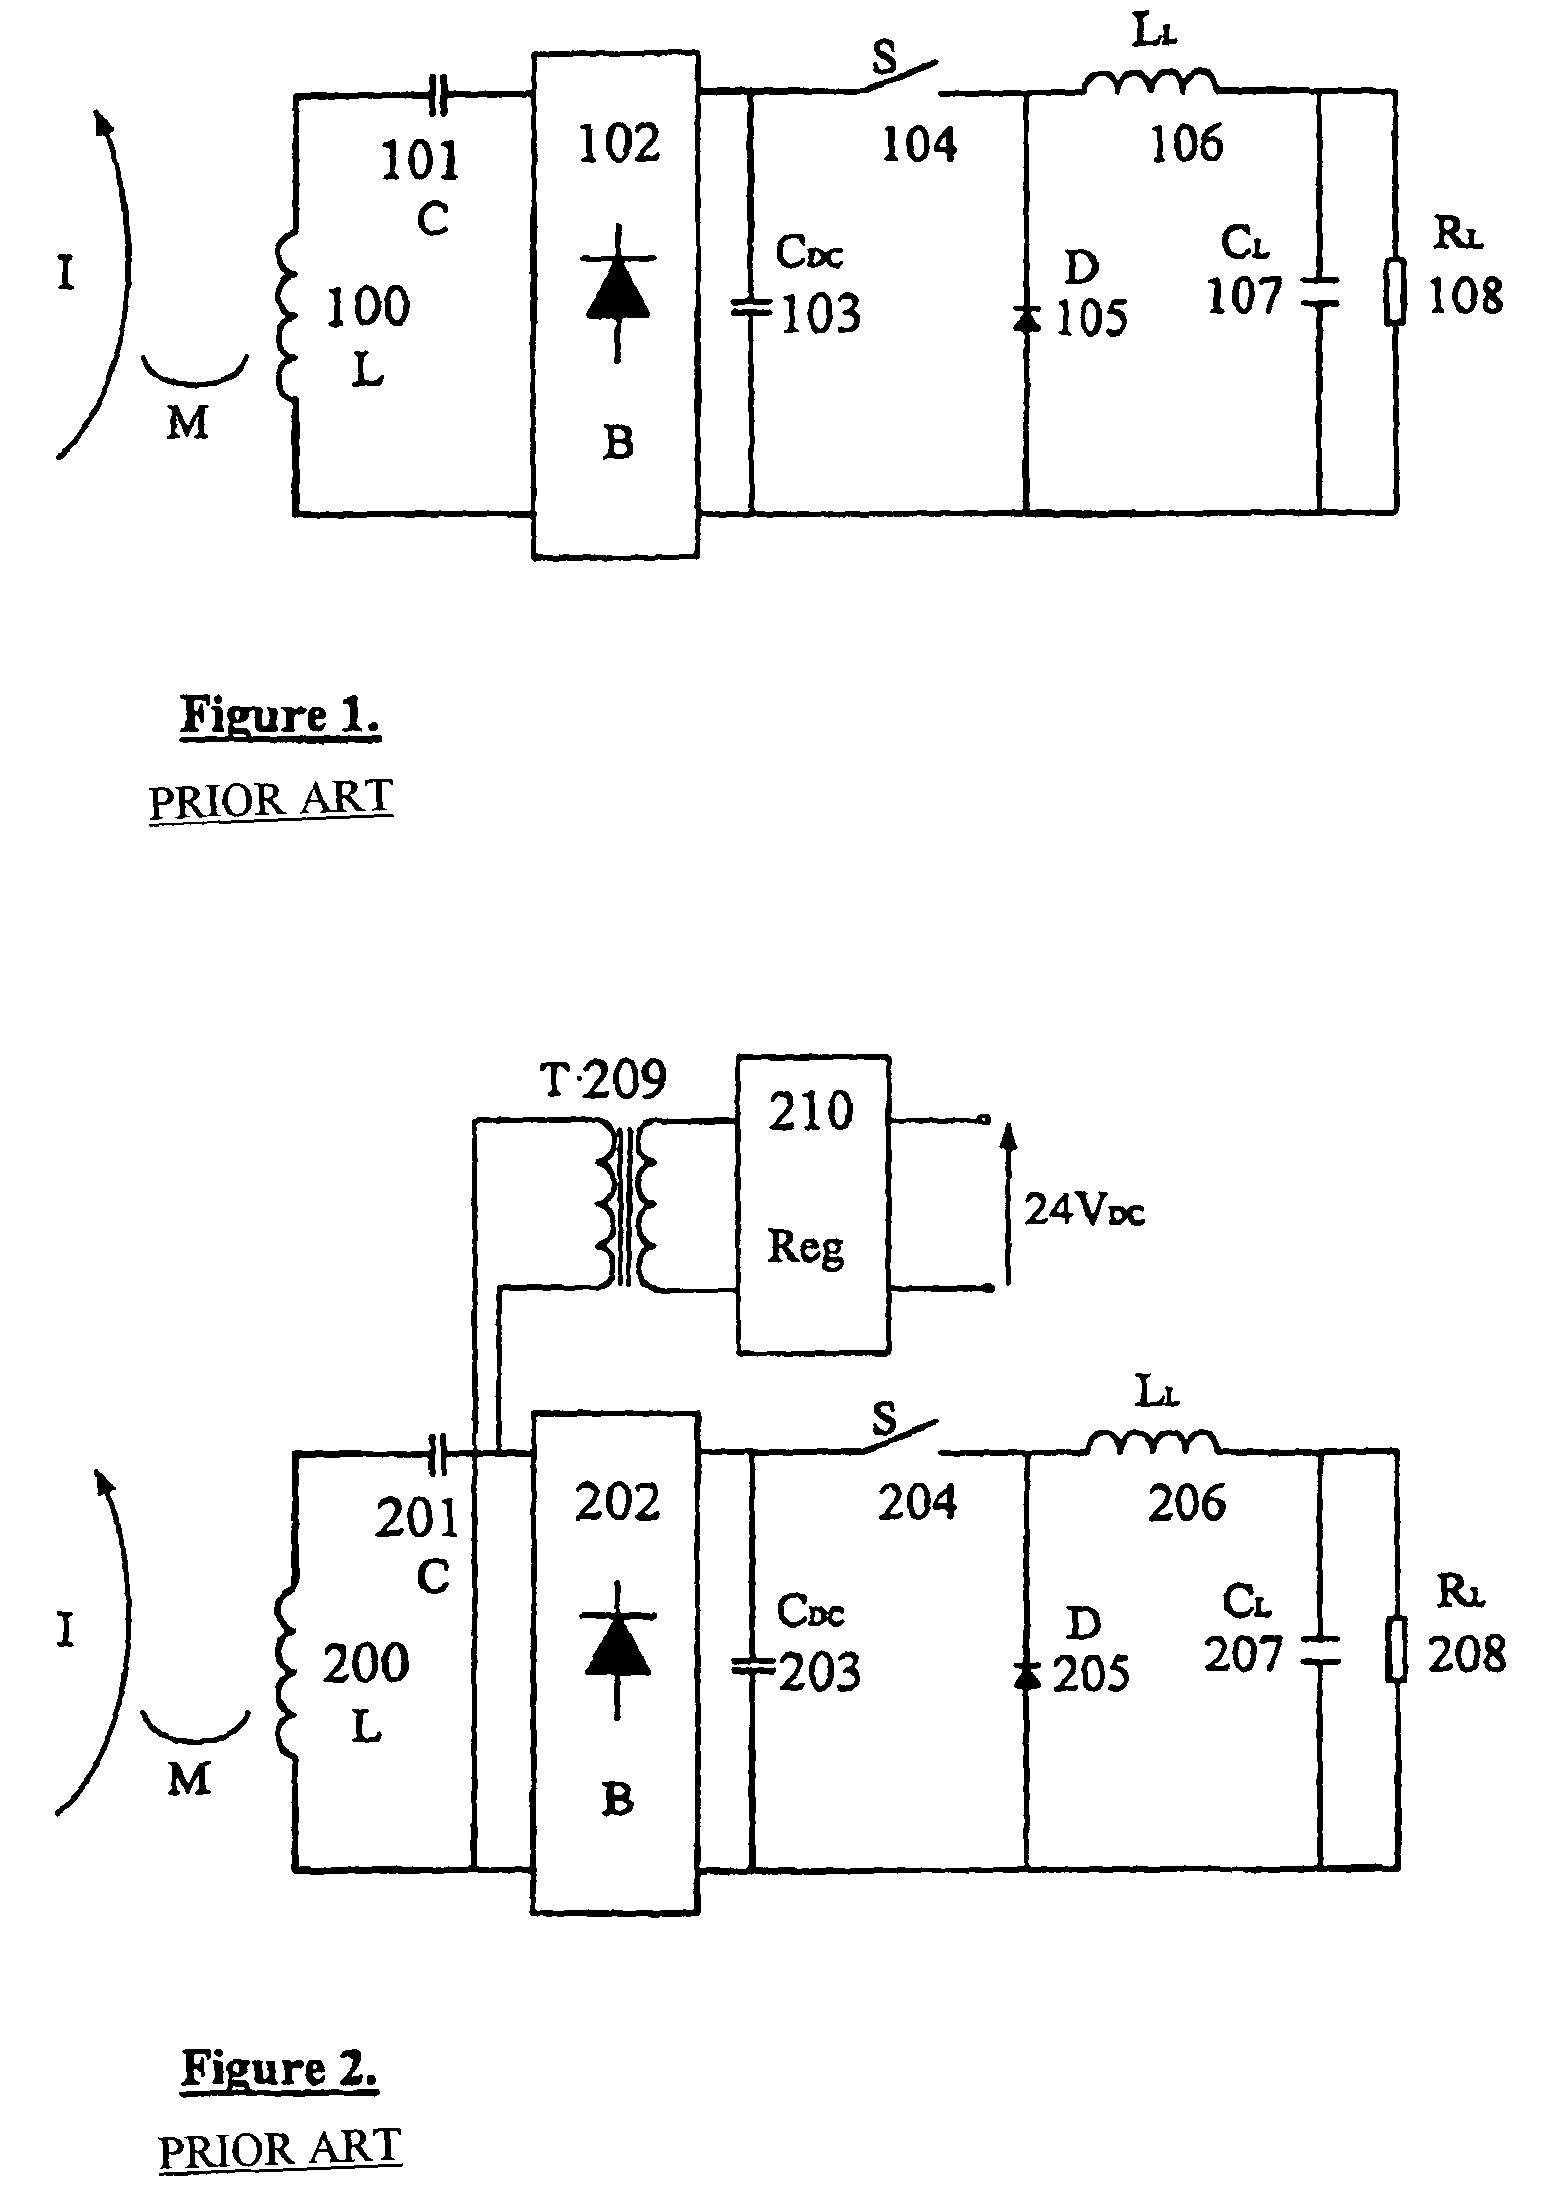 Parallel-tuned pick-up system with multiple voltage outputs